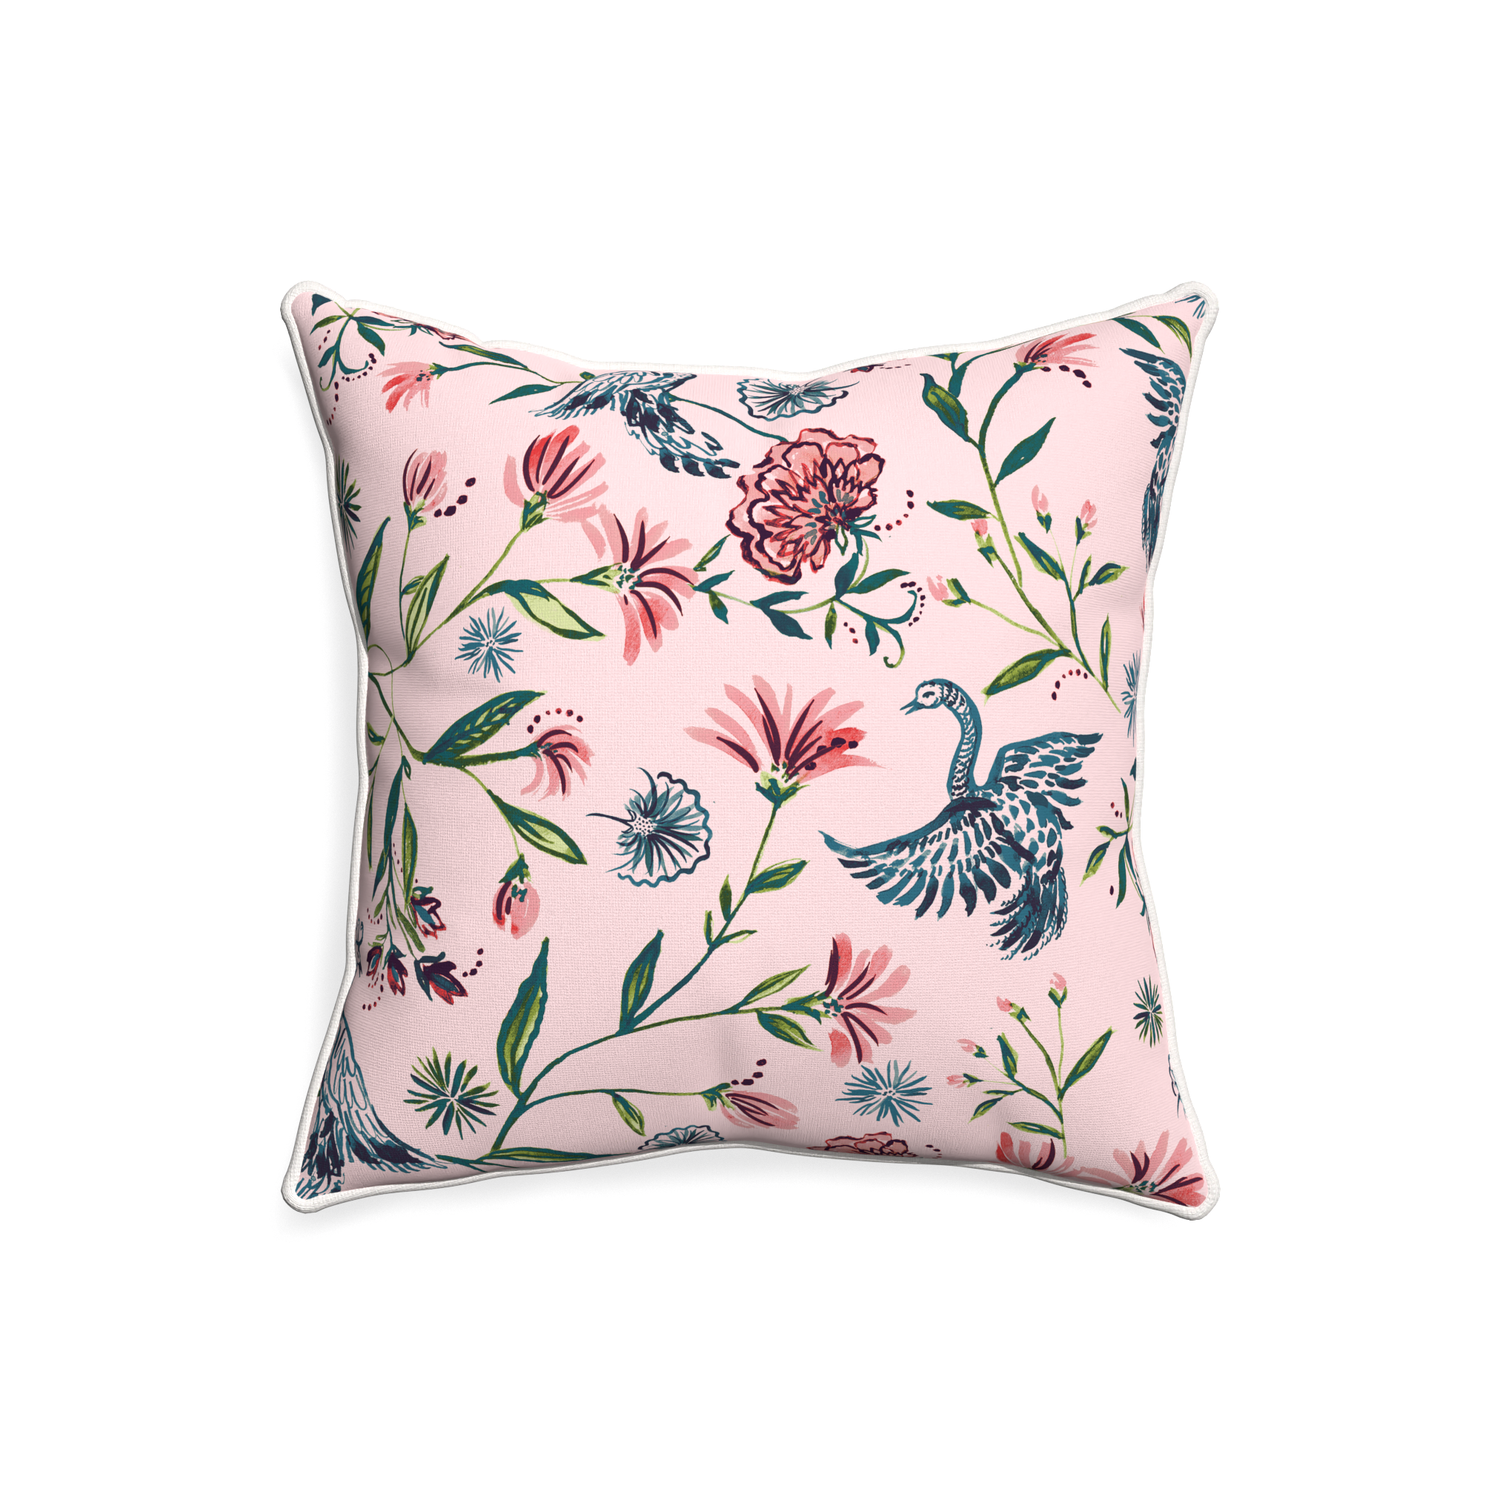 20-square daphne rose custom pillow with snow piping on white background